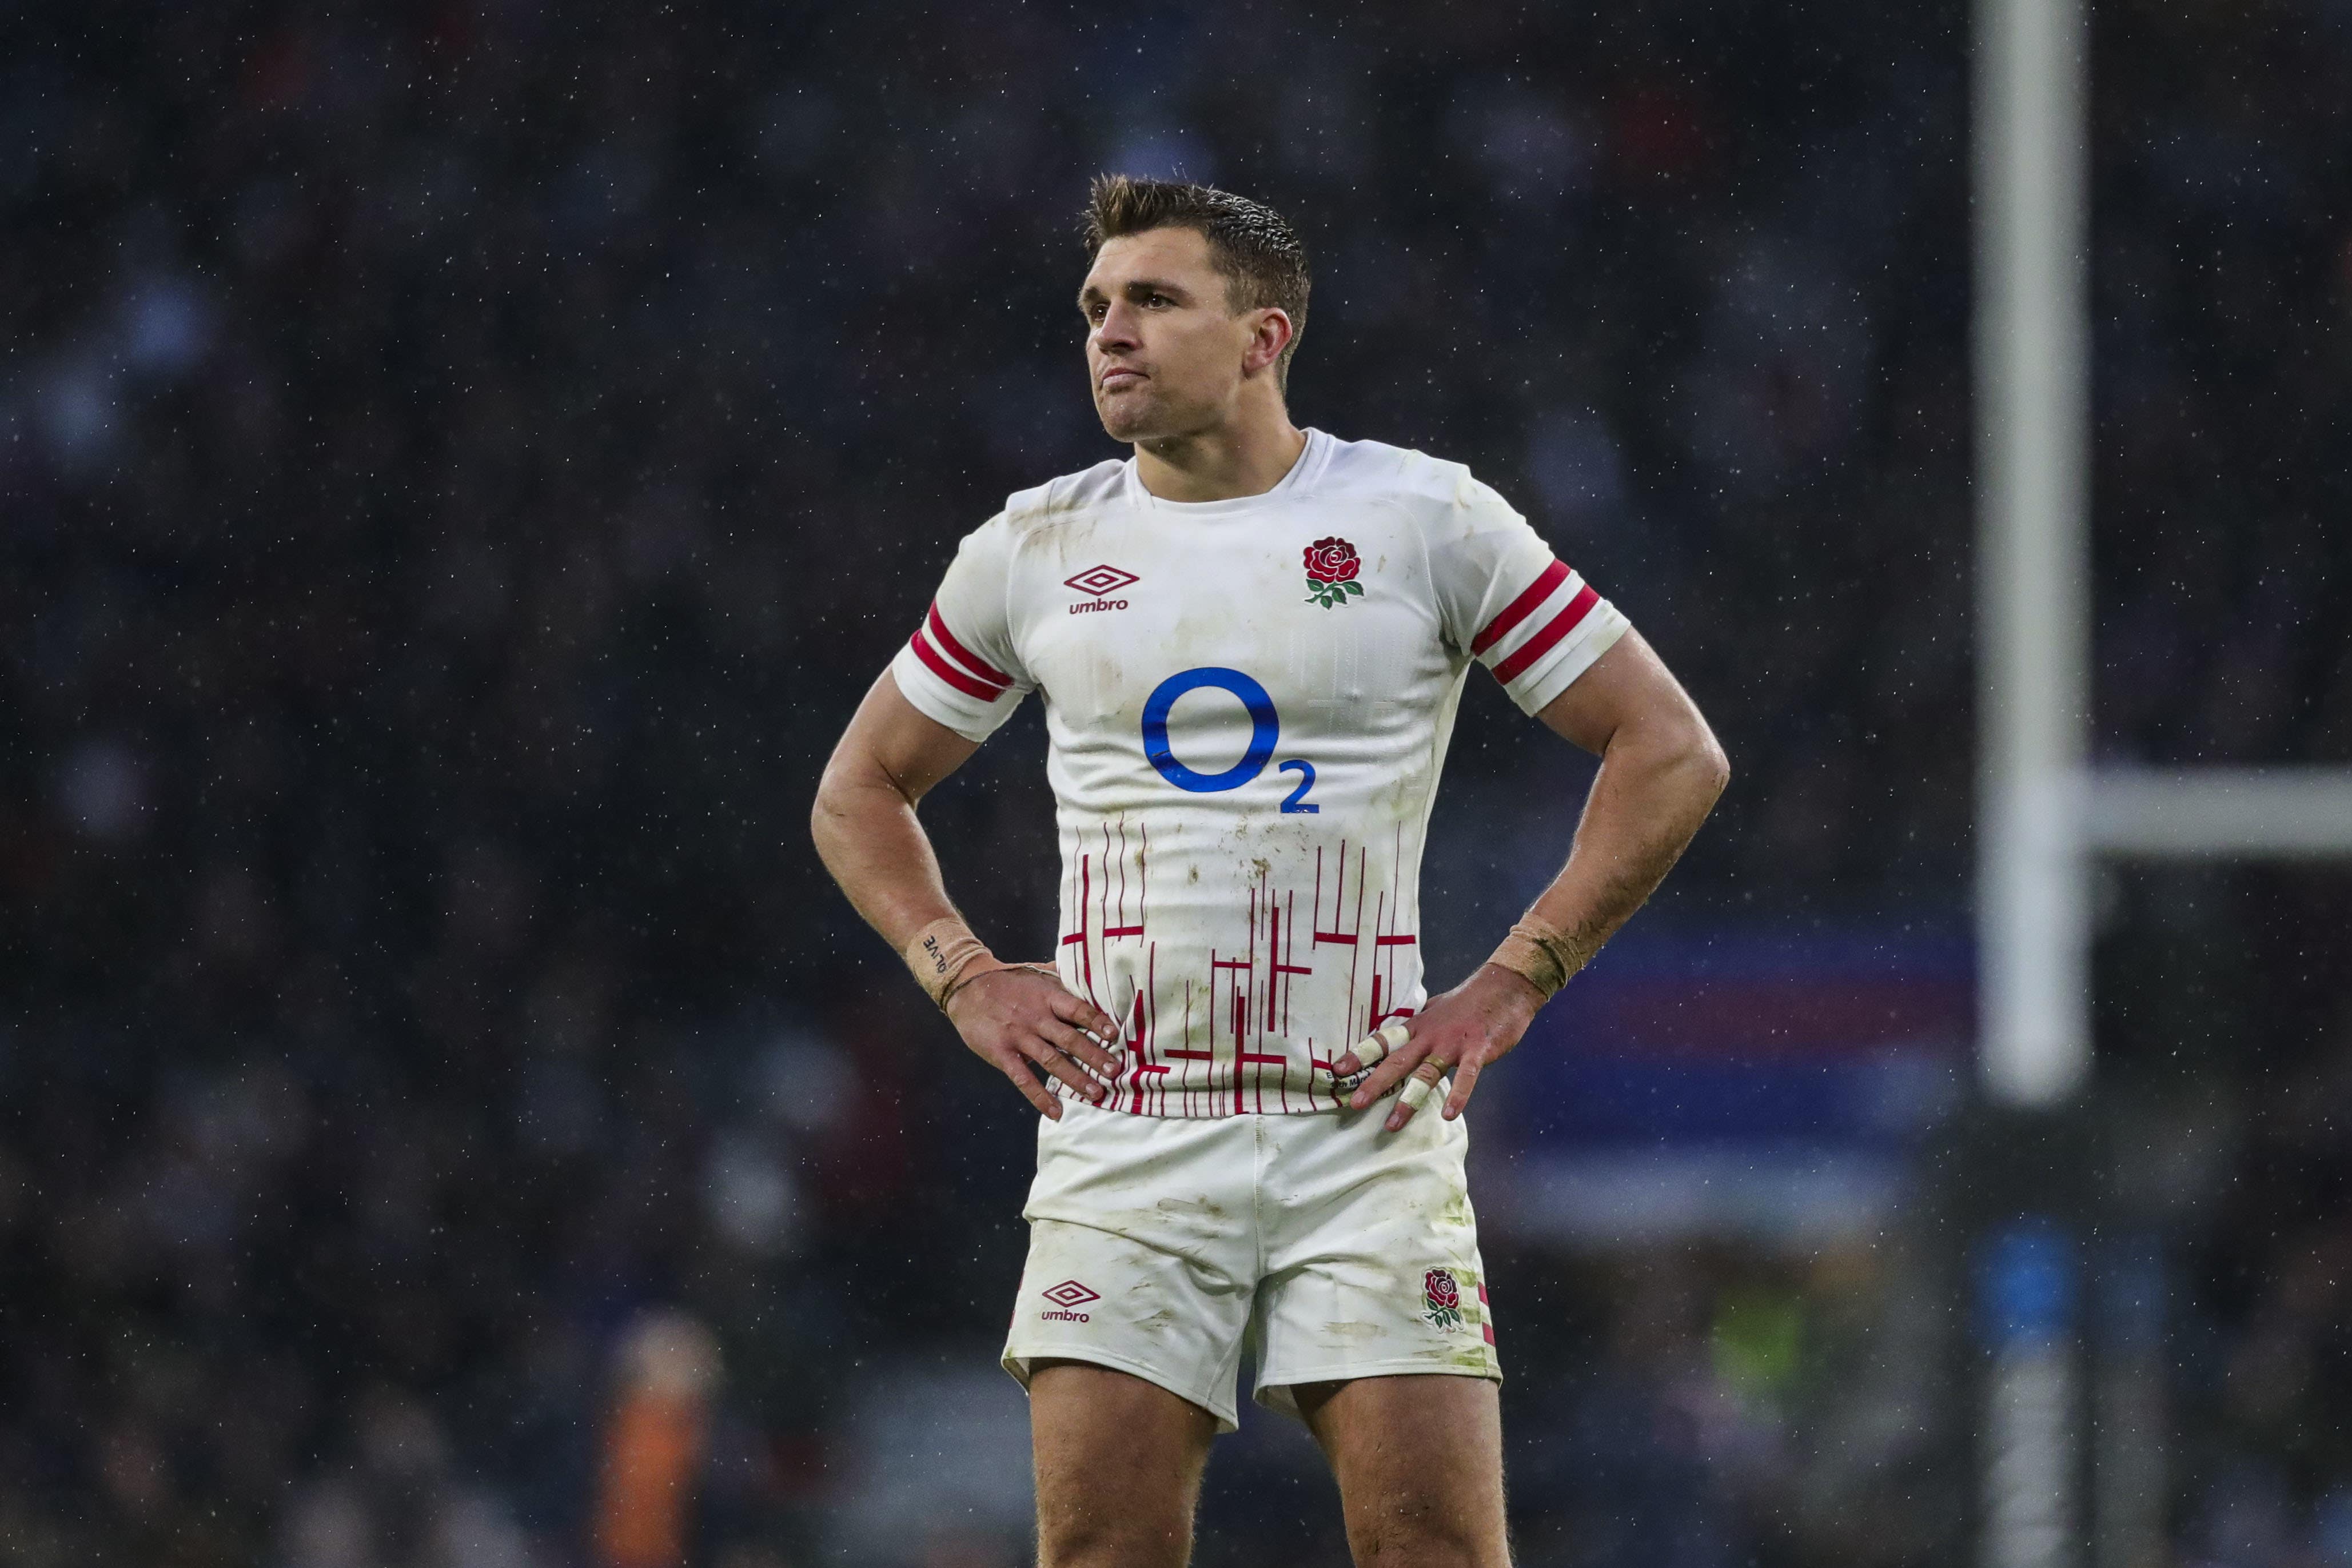 Henry Slade is the only member of England’s first-choice midfield that has been available so far in the Six Nations